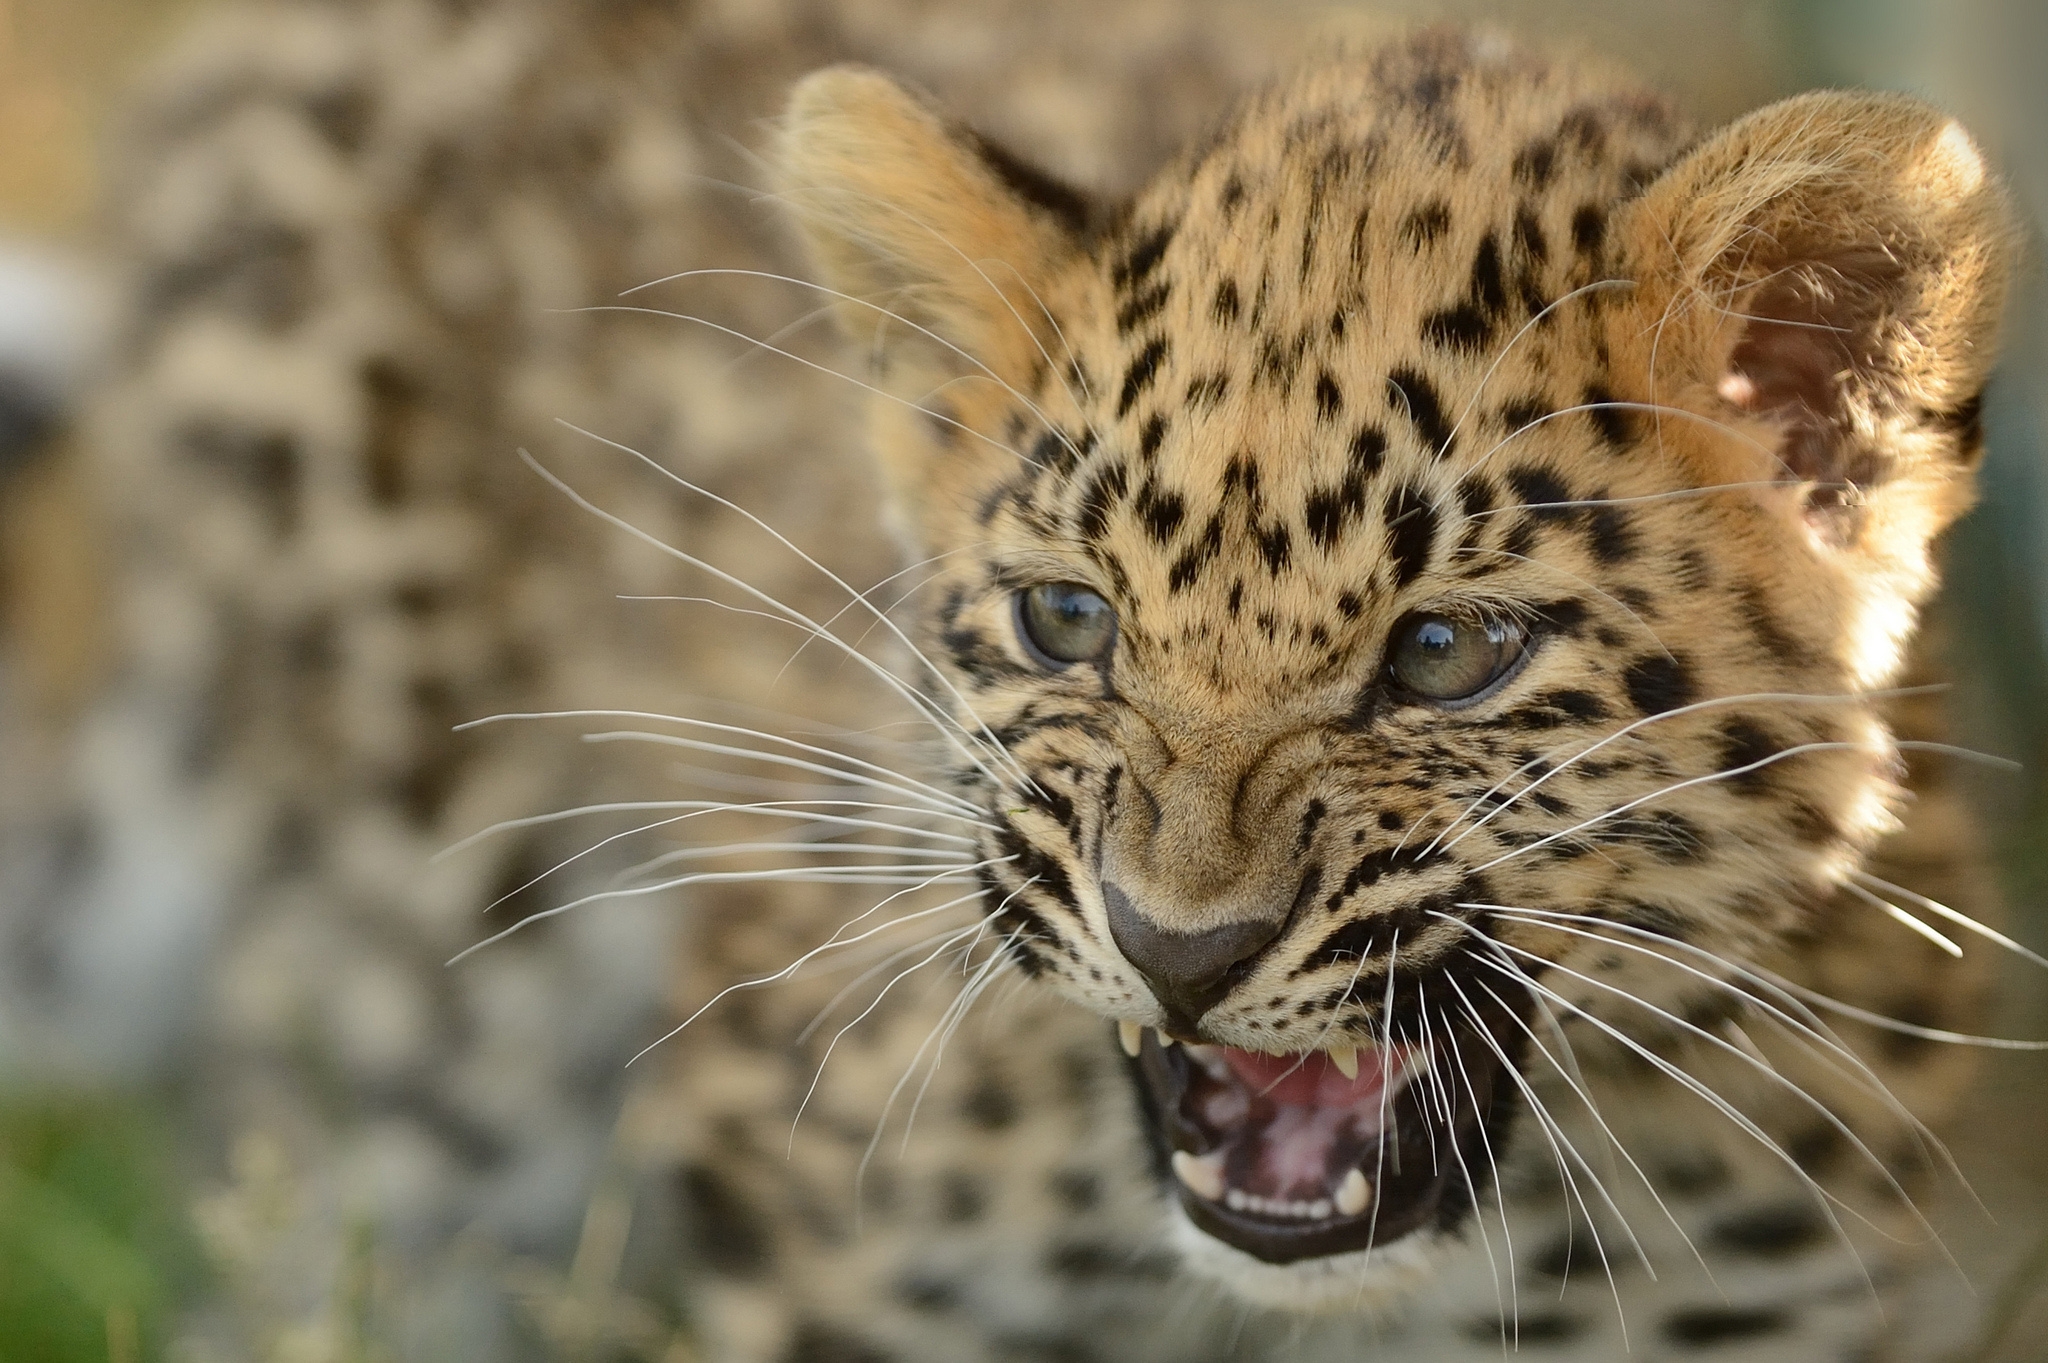 50403 download wallpaper animals, far eastern leopard, amur leopard, young, calf, kitty, kitten, leopard, aggression, grin screensavers and pictures for free